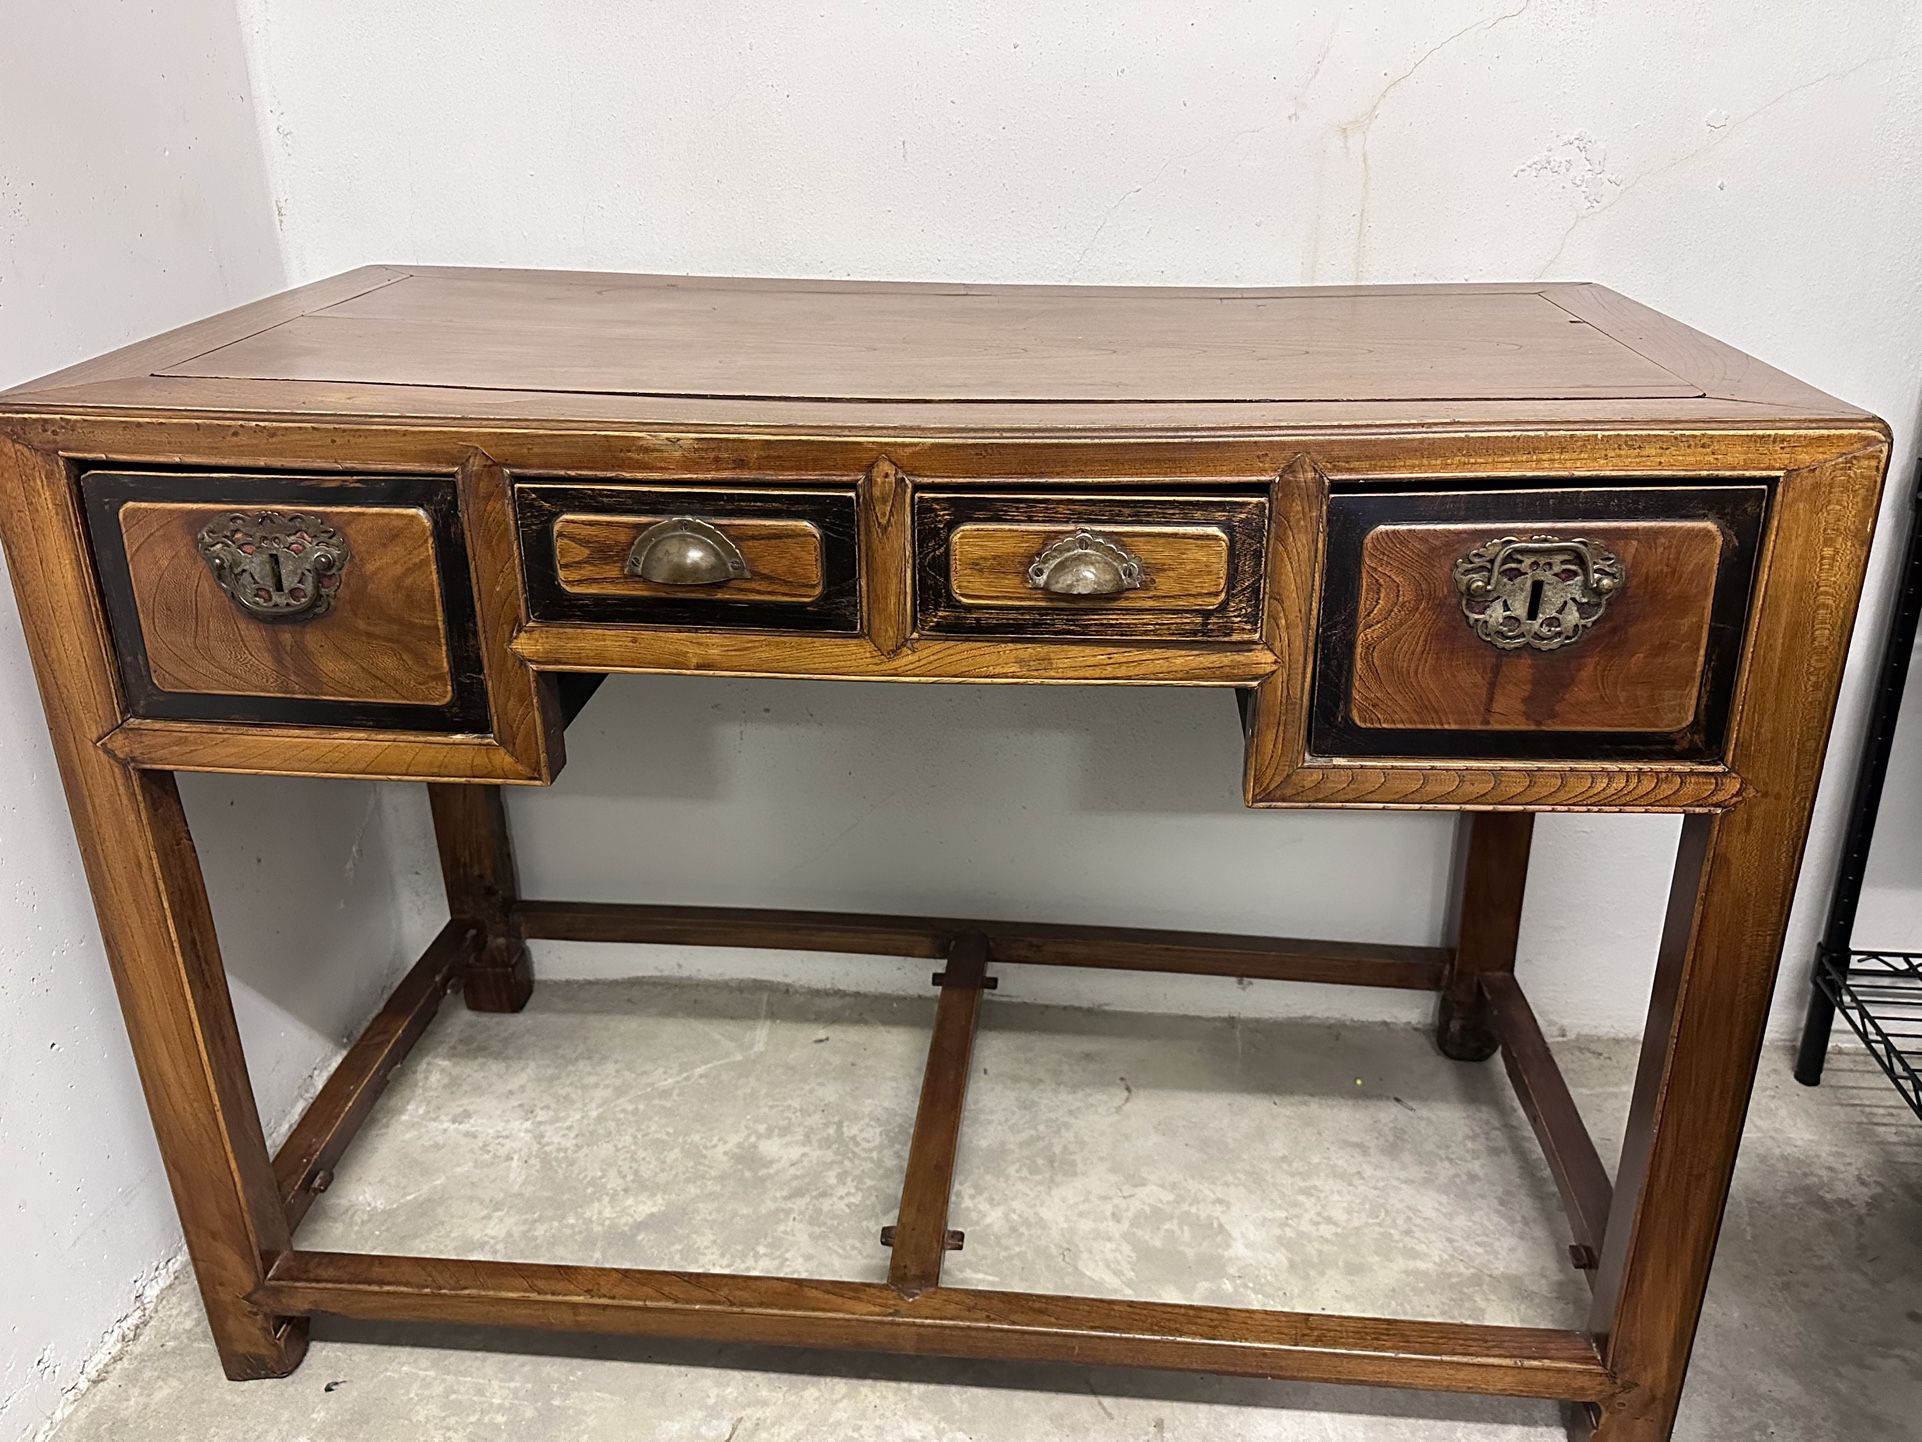 Antique Desk - Shipped from China